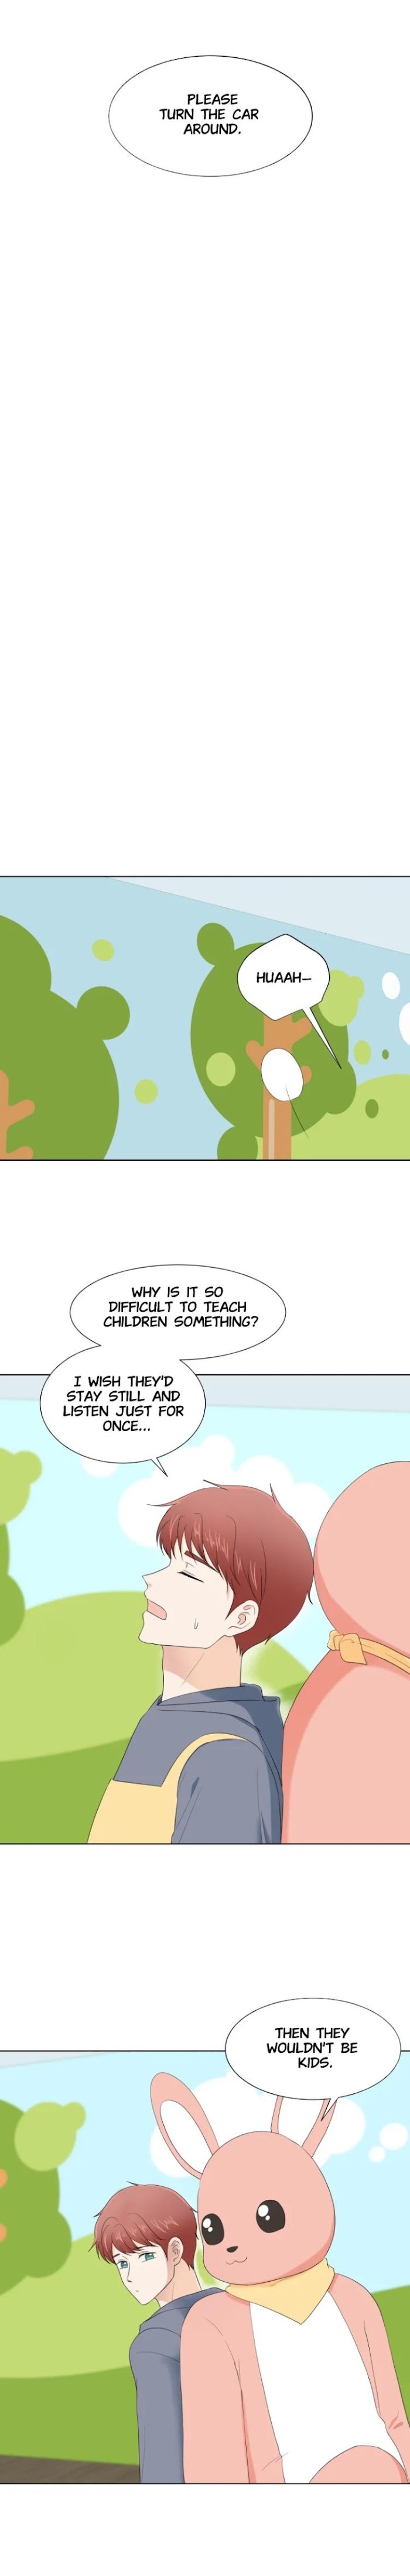 Raising A Child And Falling In Love - Page 3